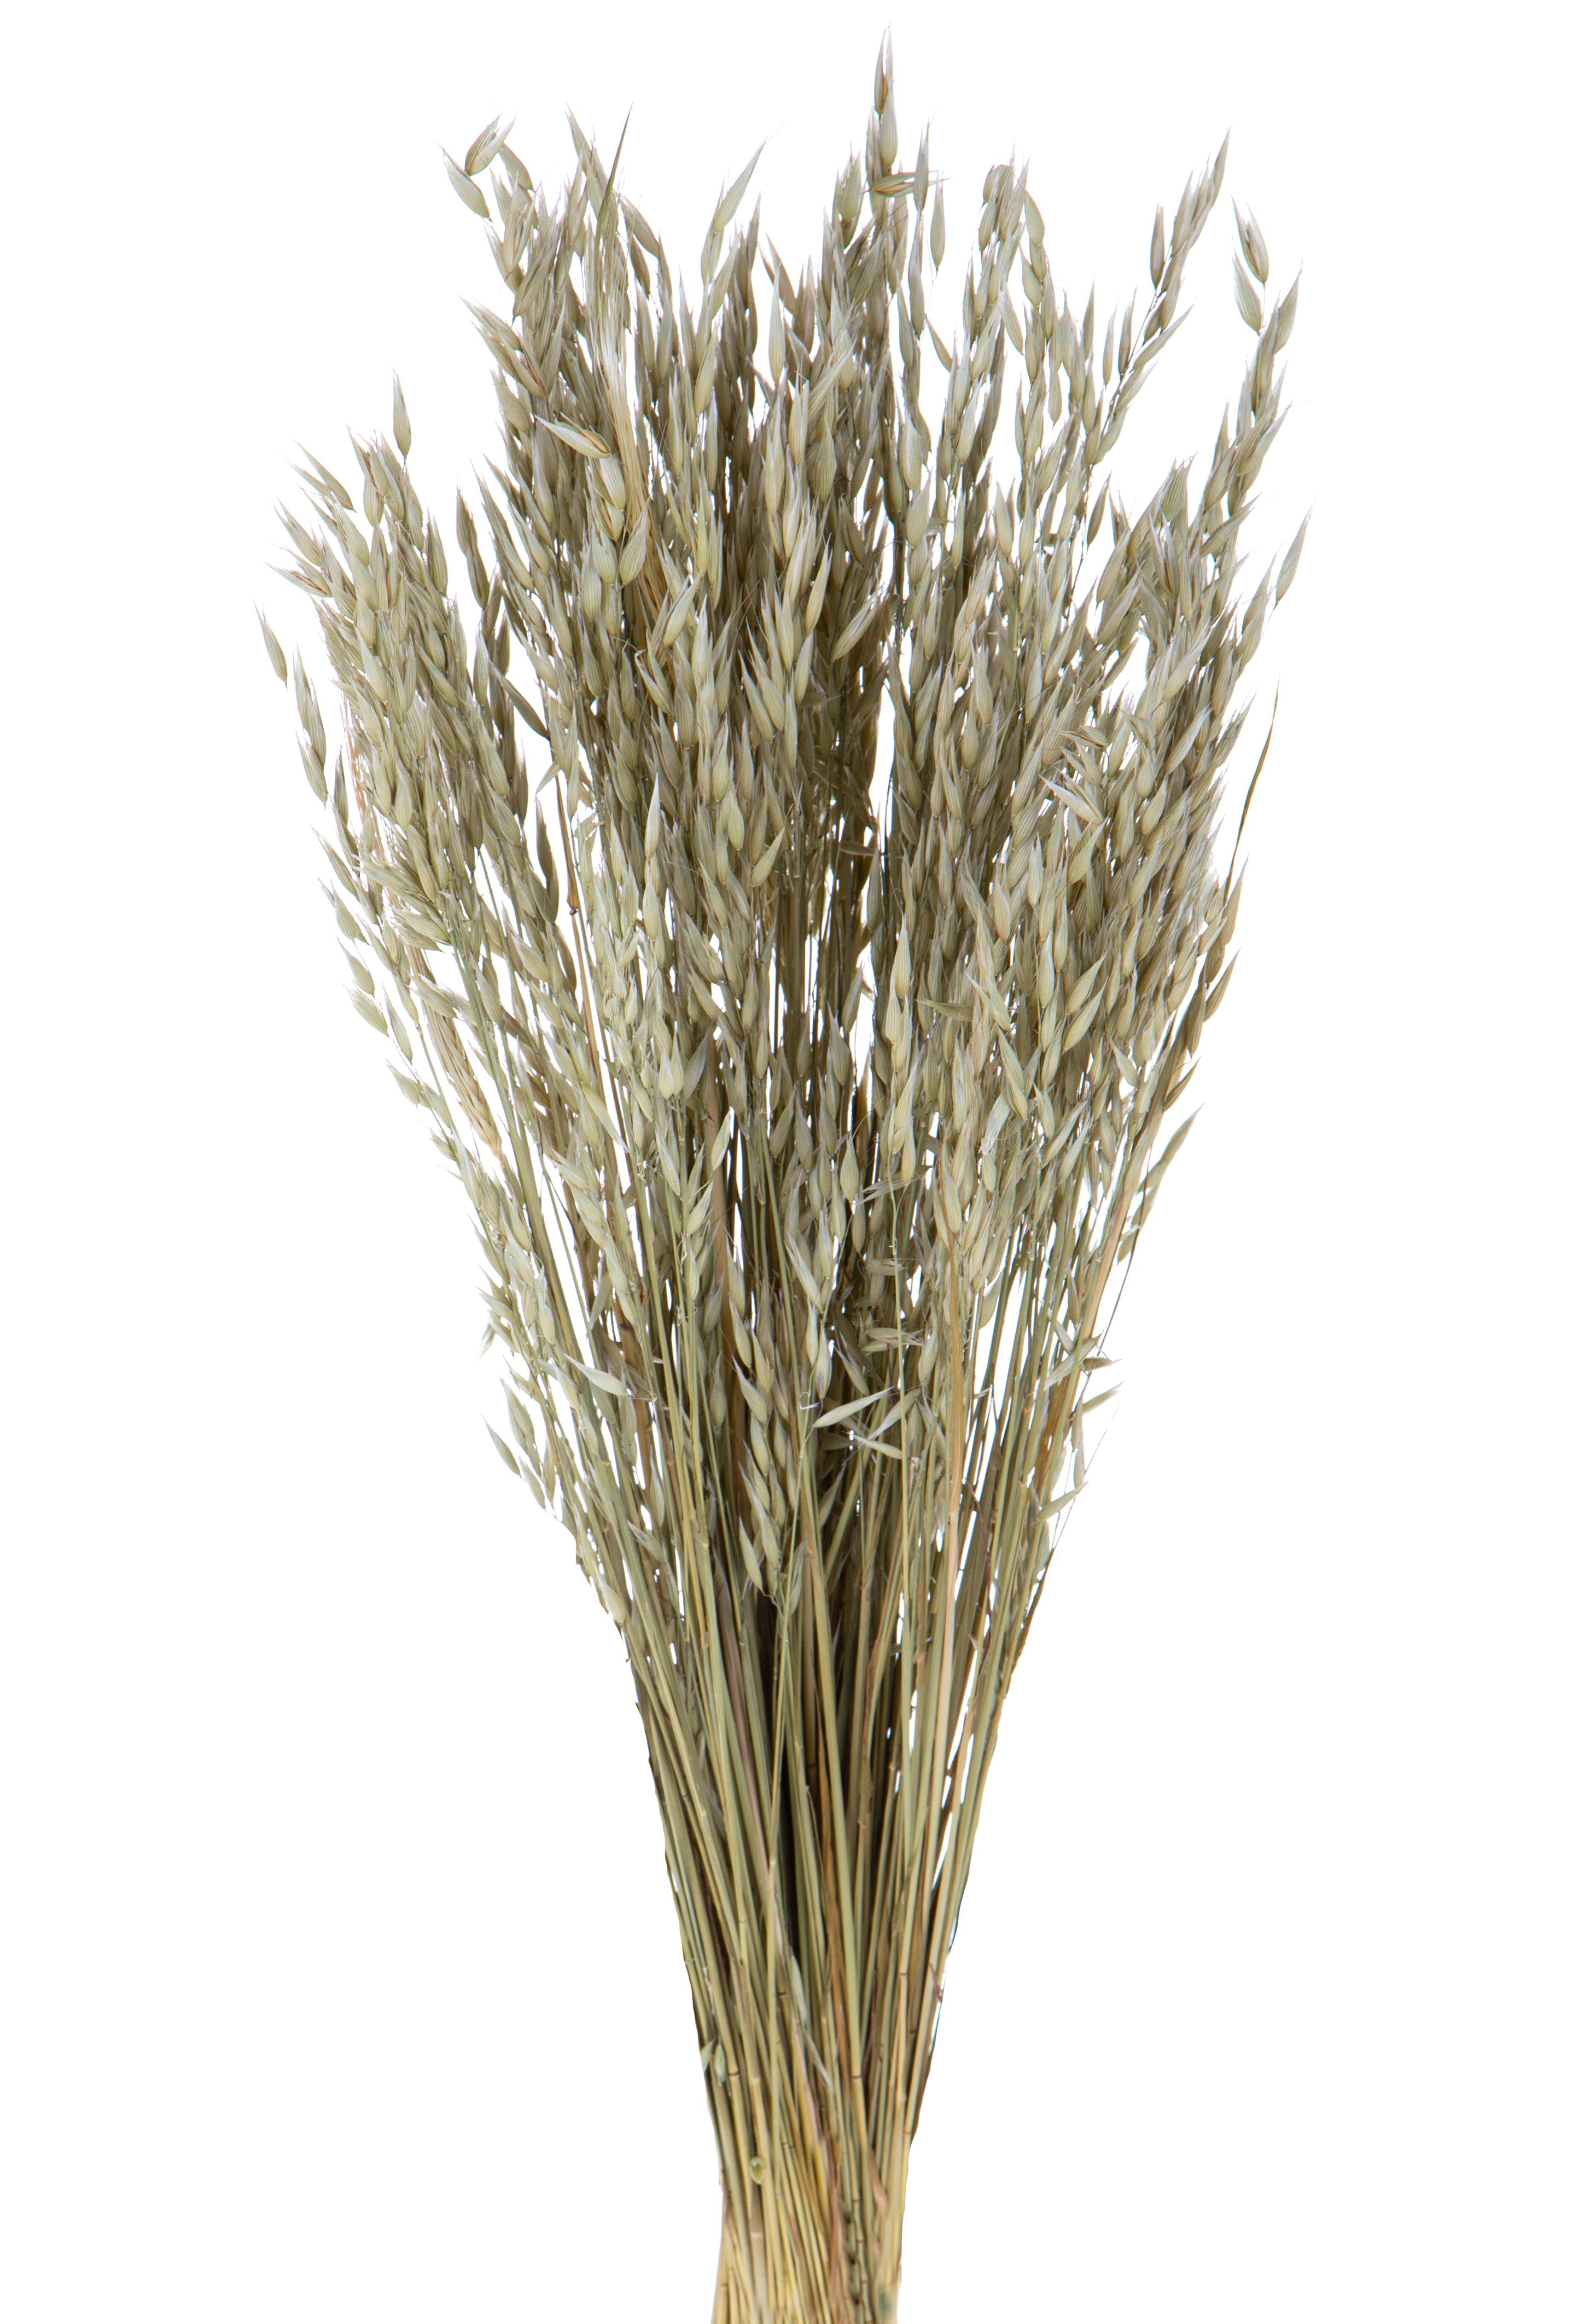 NATURAL PRODUCTS DRIED FLOWERS AND ERBS,AVENA SATIVA COLTIVATA NAT A KG.